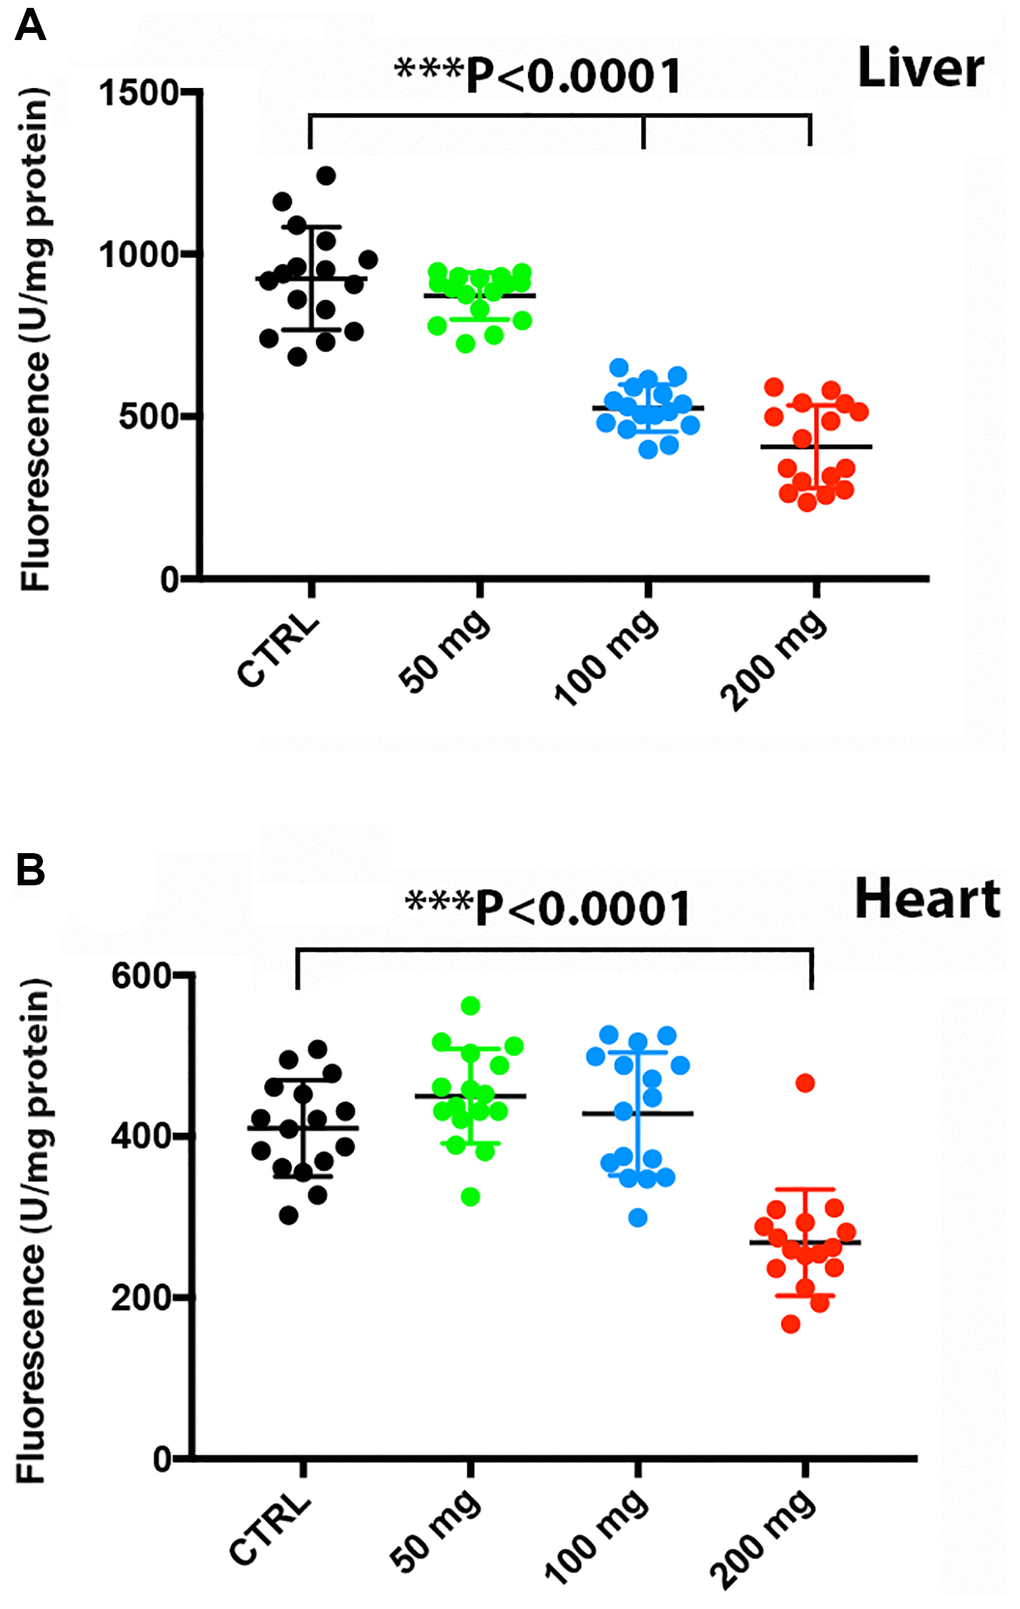 Higher doses of CQ attenuated proteasome activity in the liver and heart. Treatment with increasing doses of chloroquine significantly reduced proteasome activity in the liver at a dose of 100 mg/kg (A), whereas proteasomal activity in the heart was reduced only at 200 mg/kg (B). Data are given as arbitrary fluorescence units per mg protein as indicated in the materials and method section of the manuscript. N = 5 for each group.